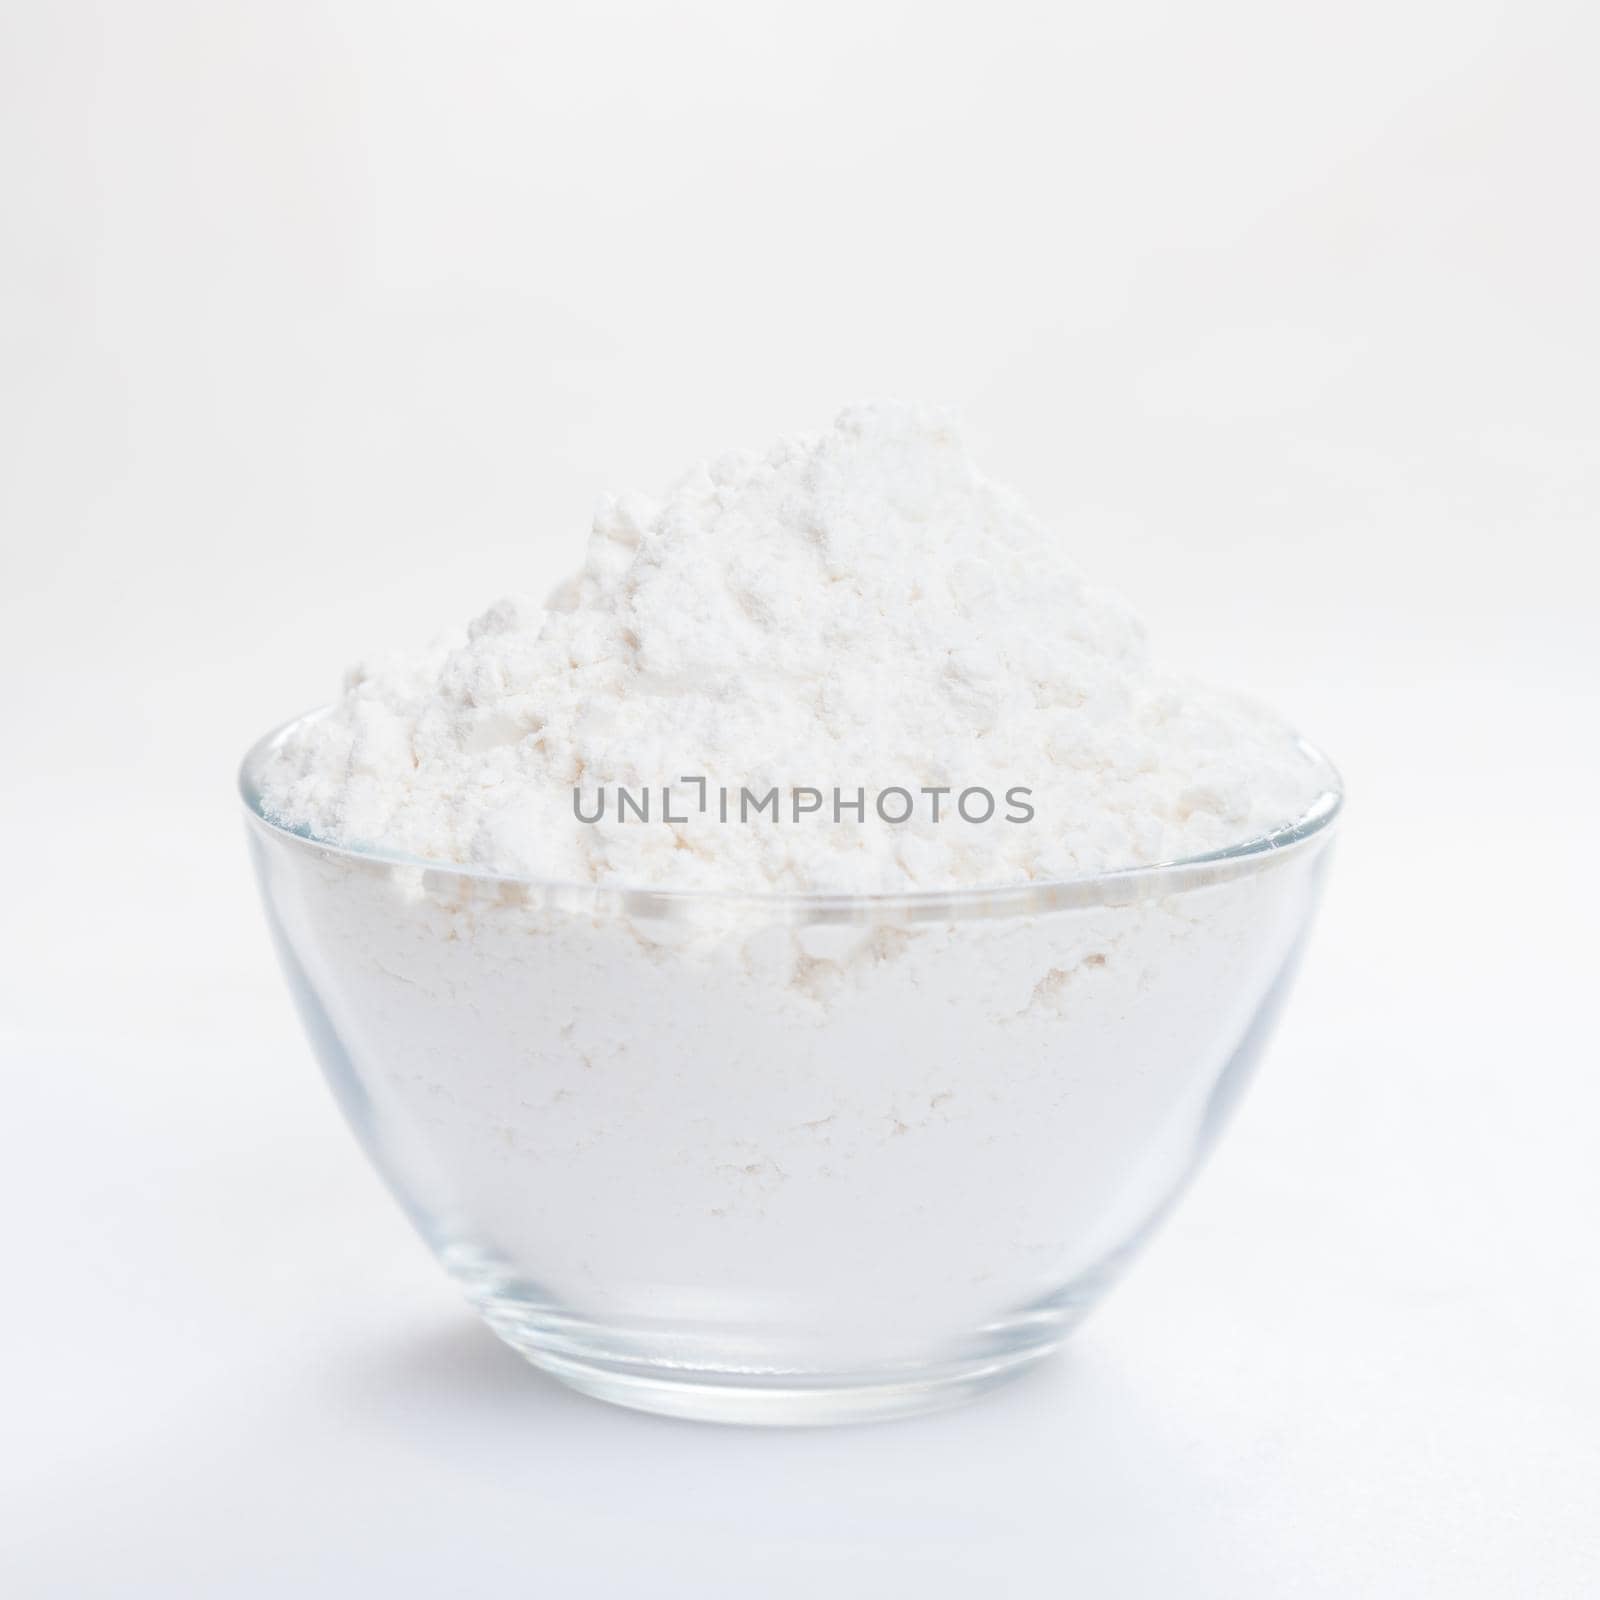 White flour in a transparent bowl, side view